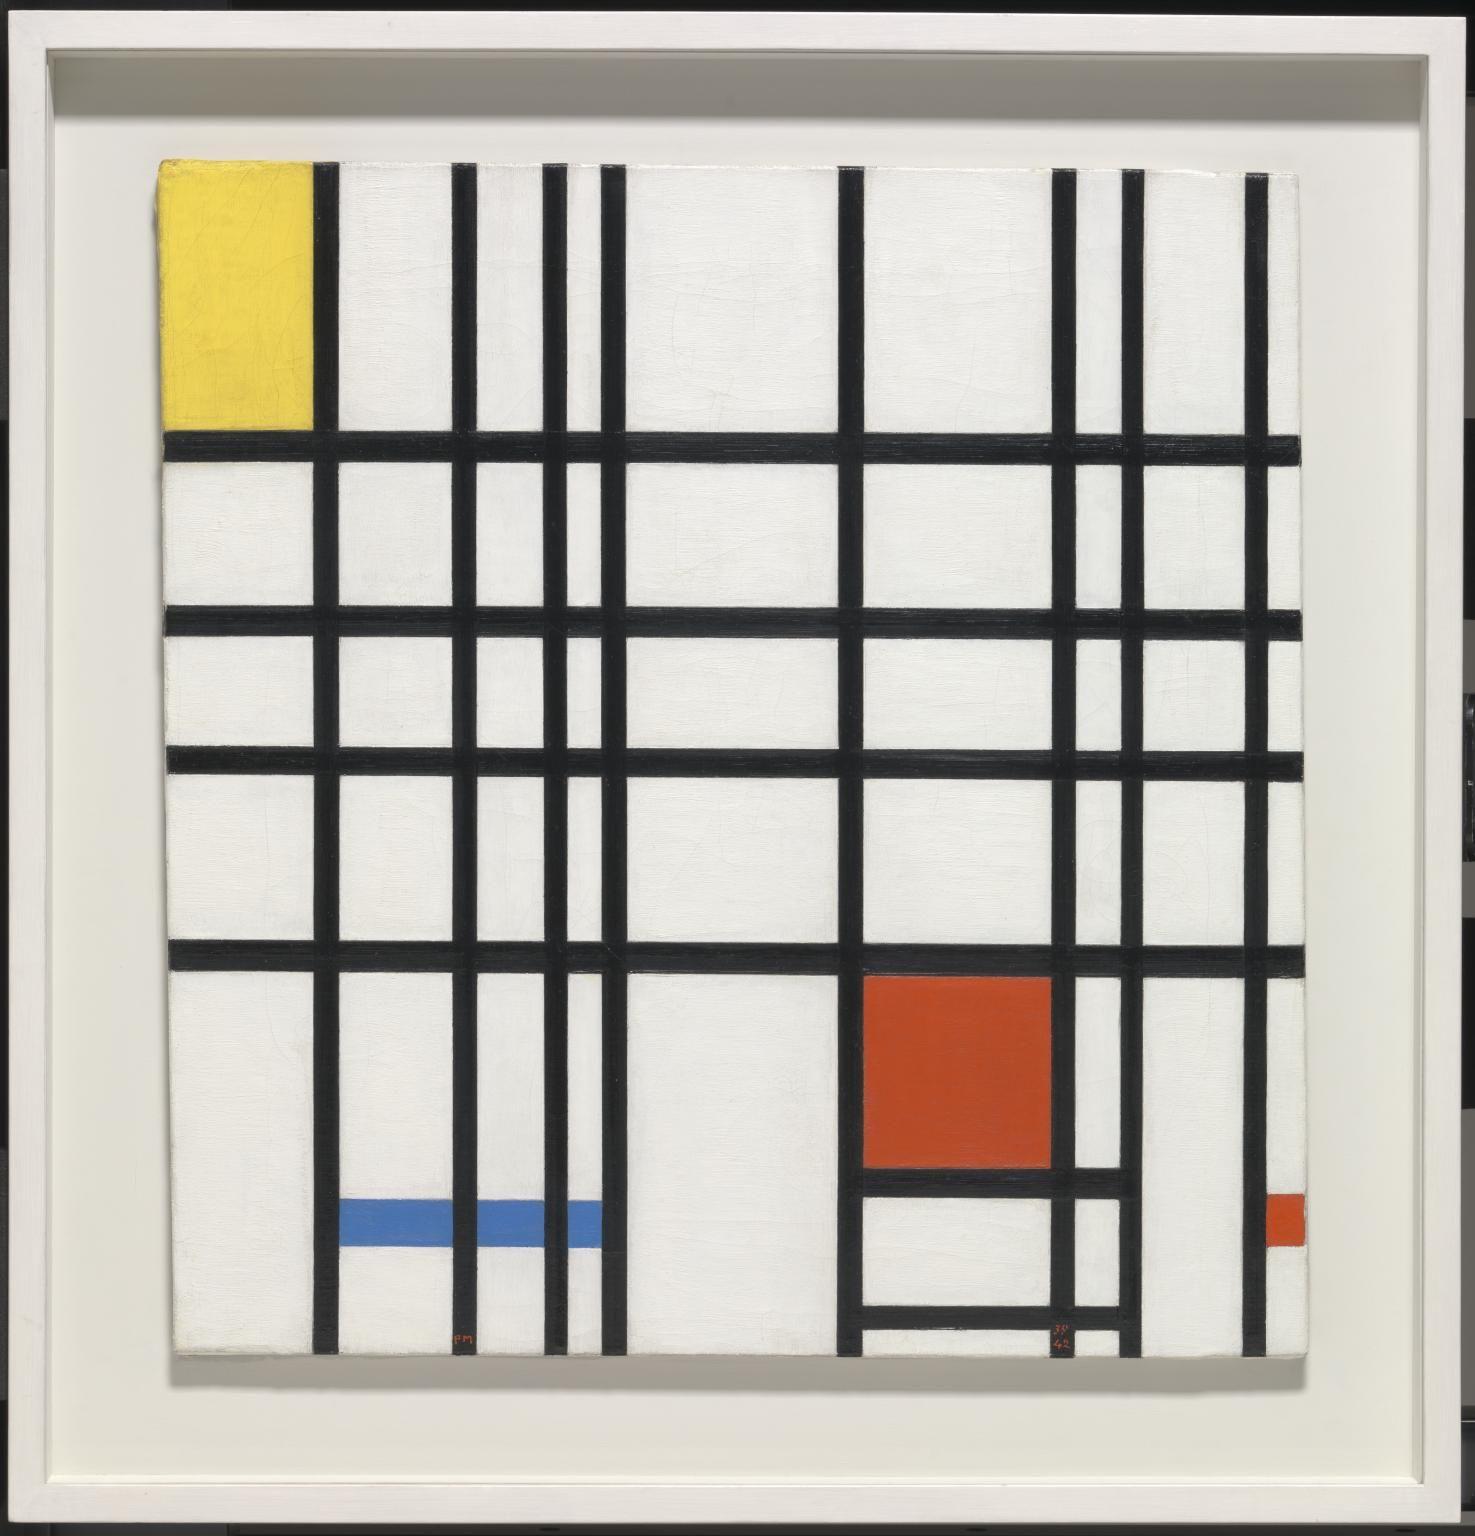 Red and Yellow Square Logo - Composition with Yellow, Blue and Red', Piet Mondrian, 1937-42 | Tate